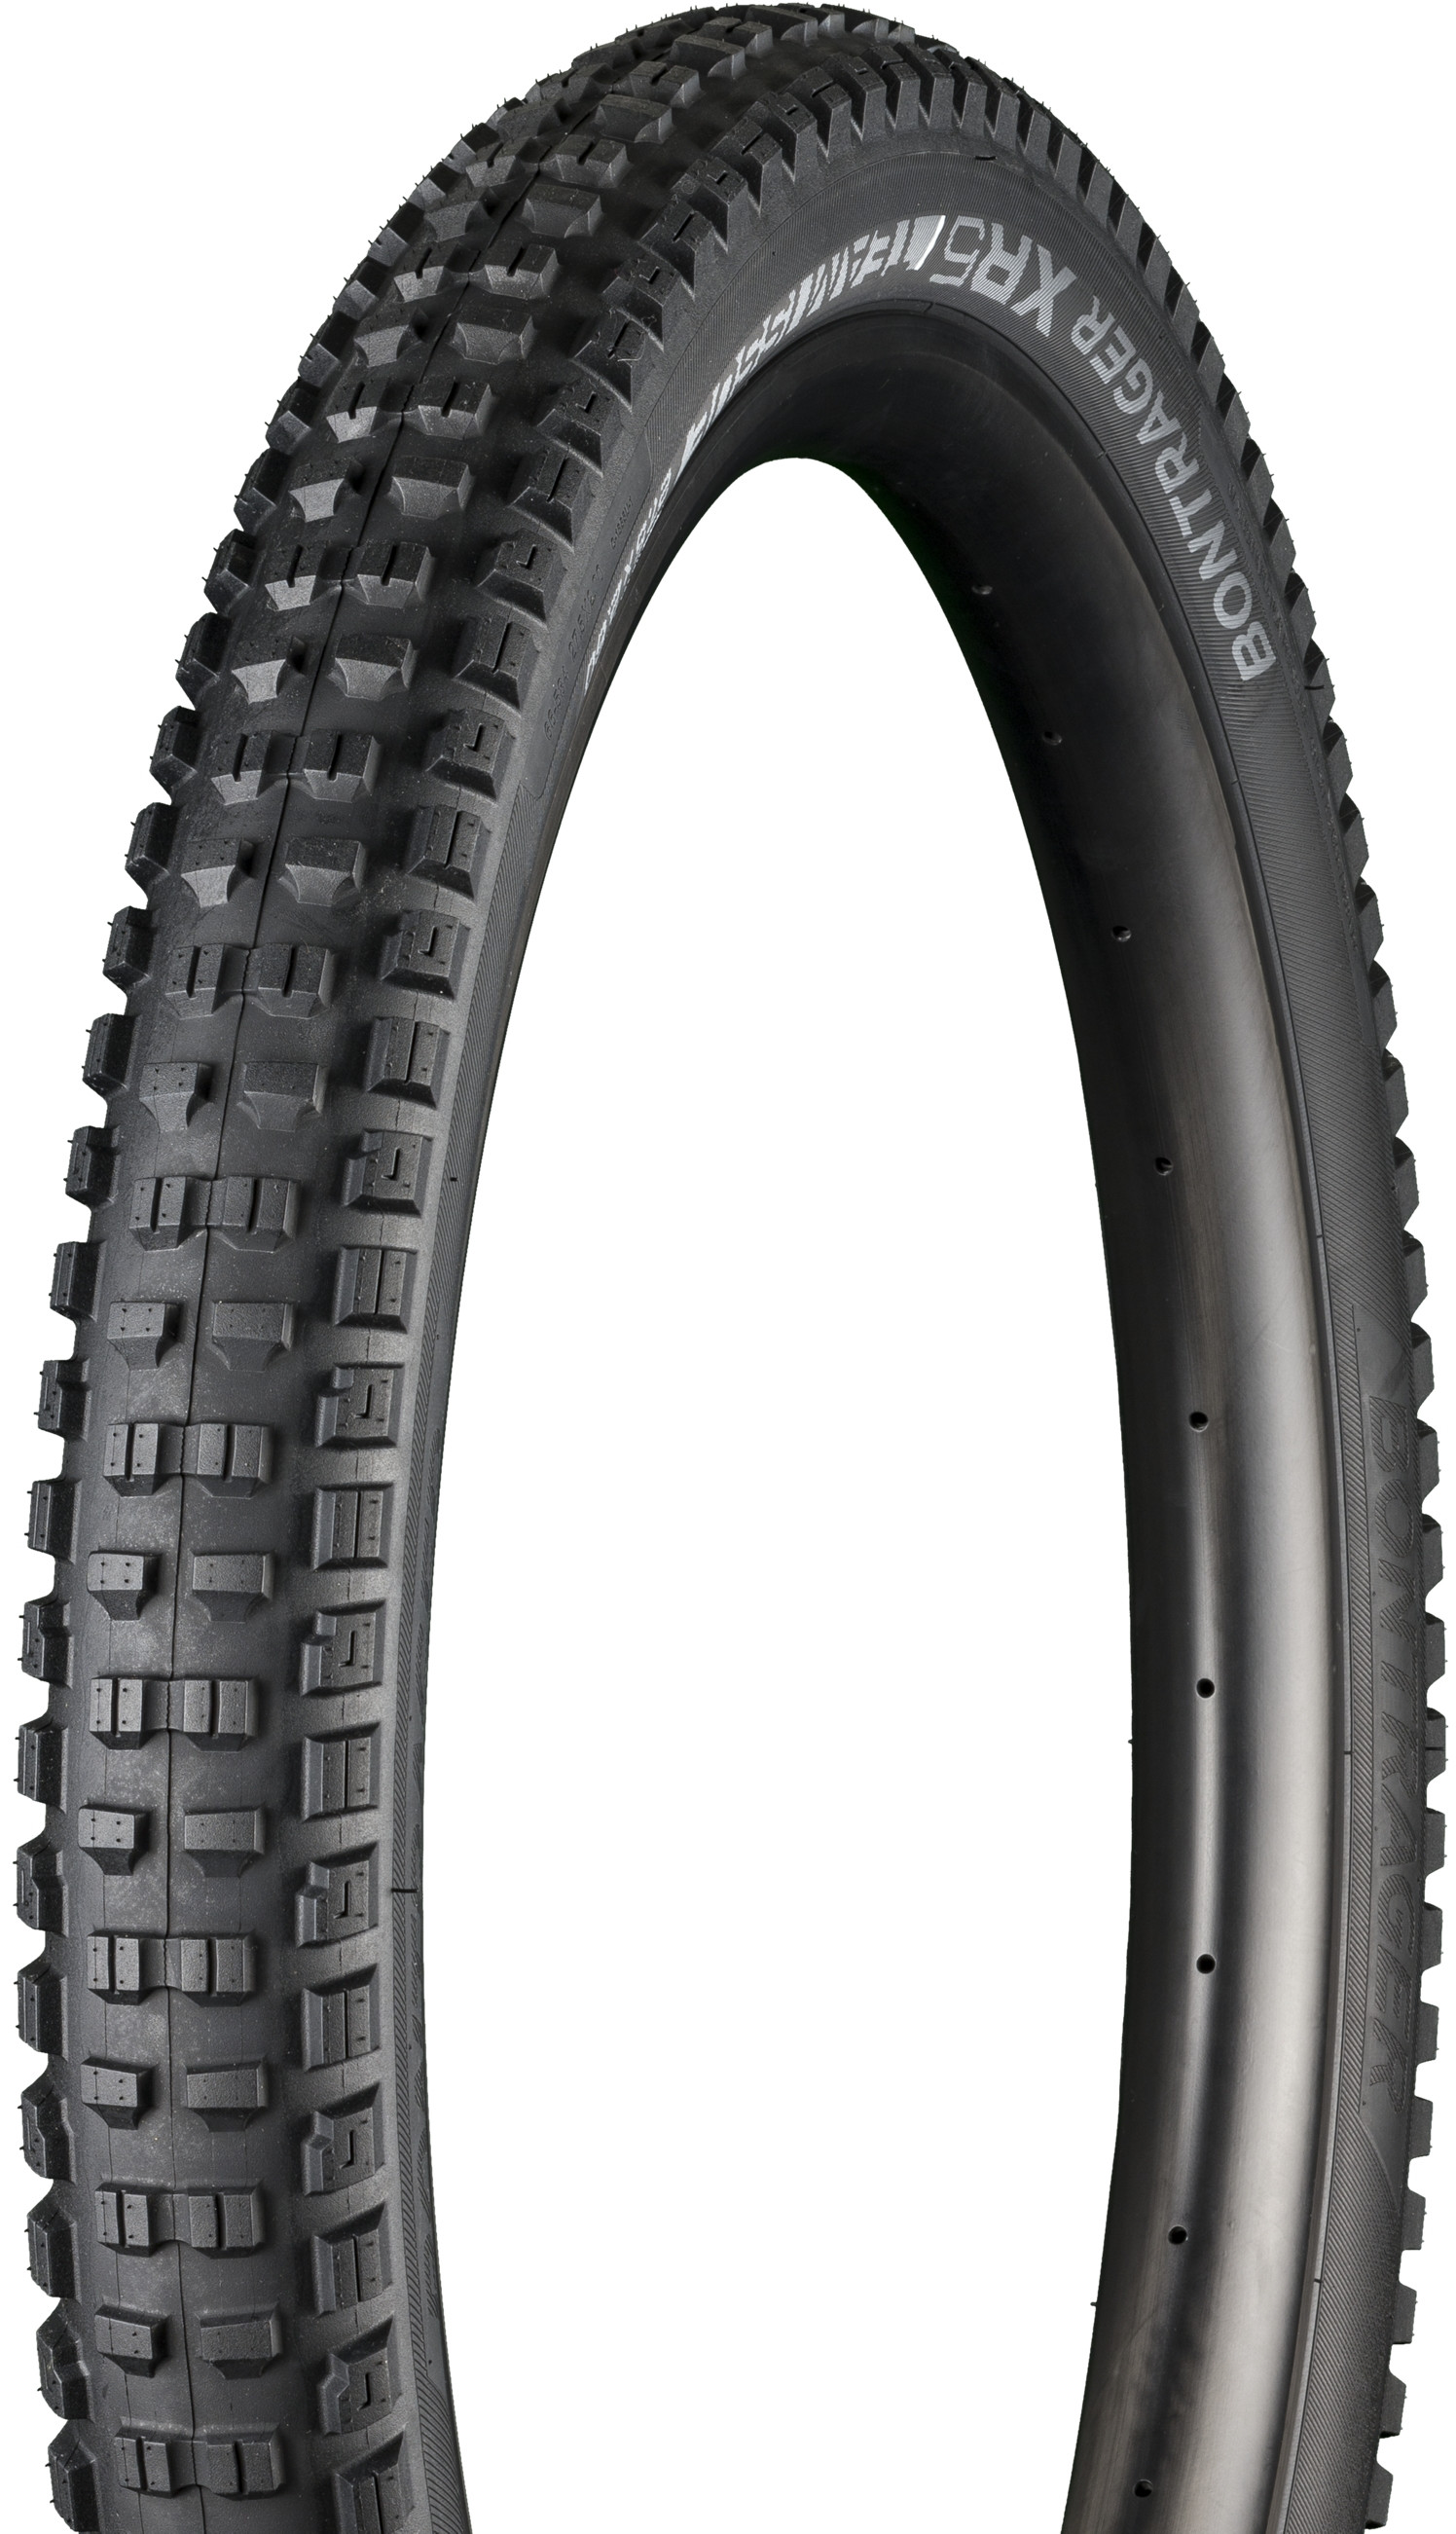 Bontrager XR5 Team Issue MTB Tire - Shop | Nevis Cycles